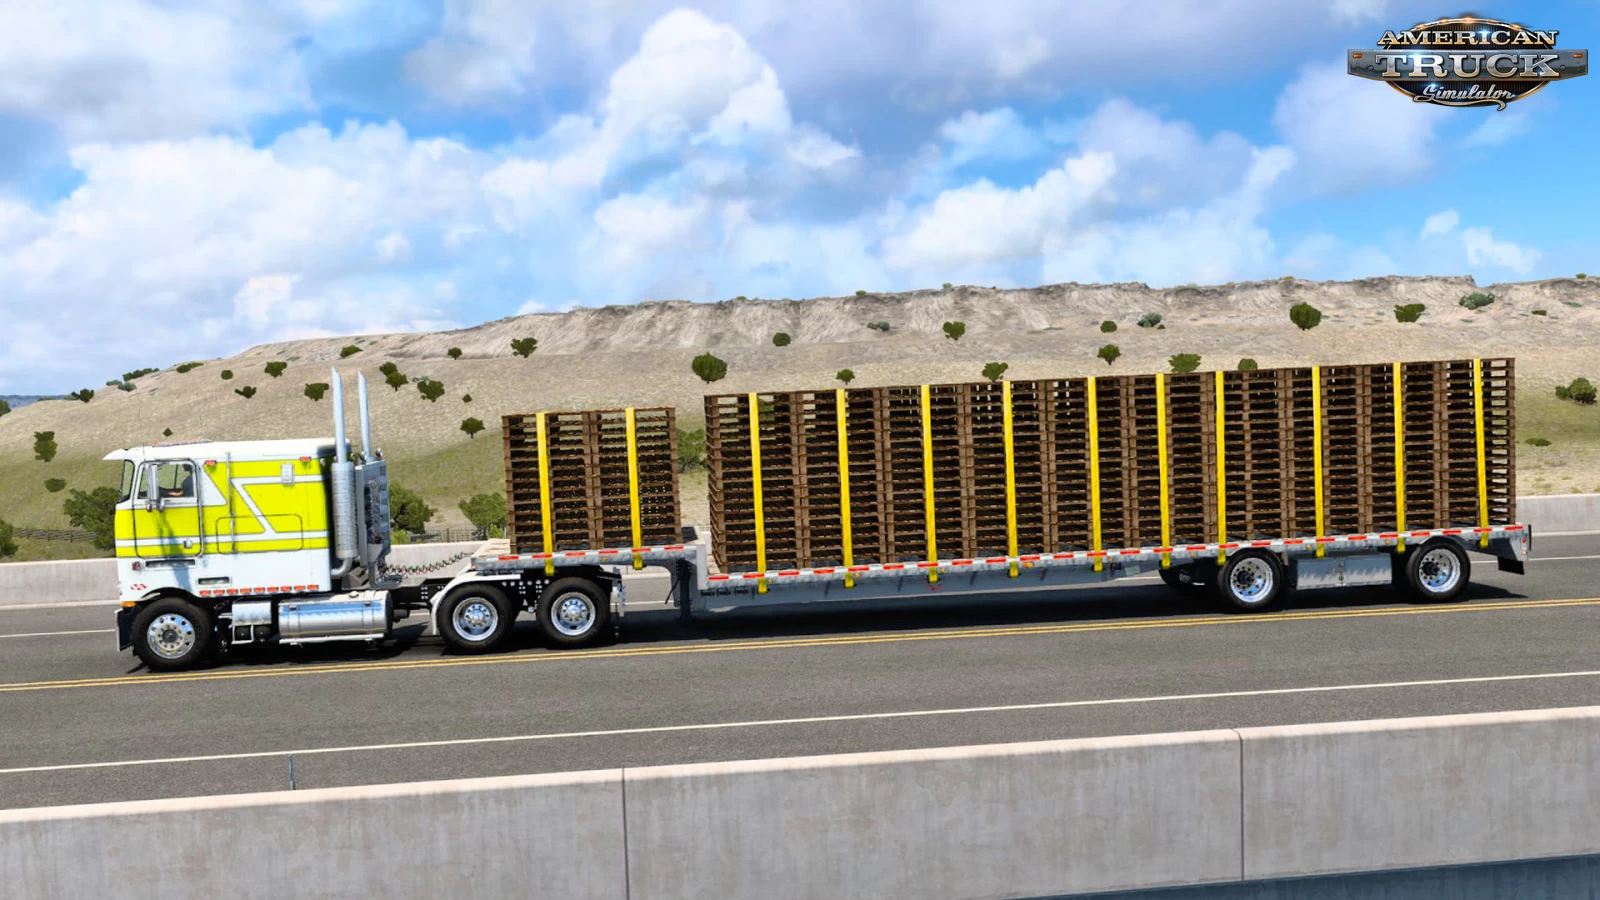 Reitnouer Dropmiser Ownable Trailer v1.1 (1.41.x) for ATS